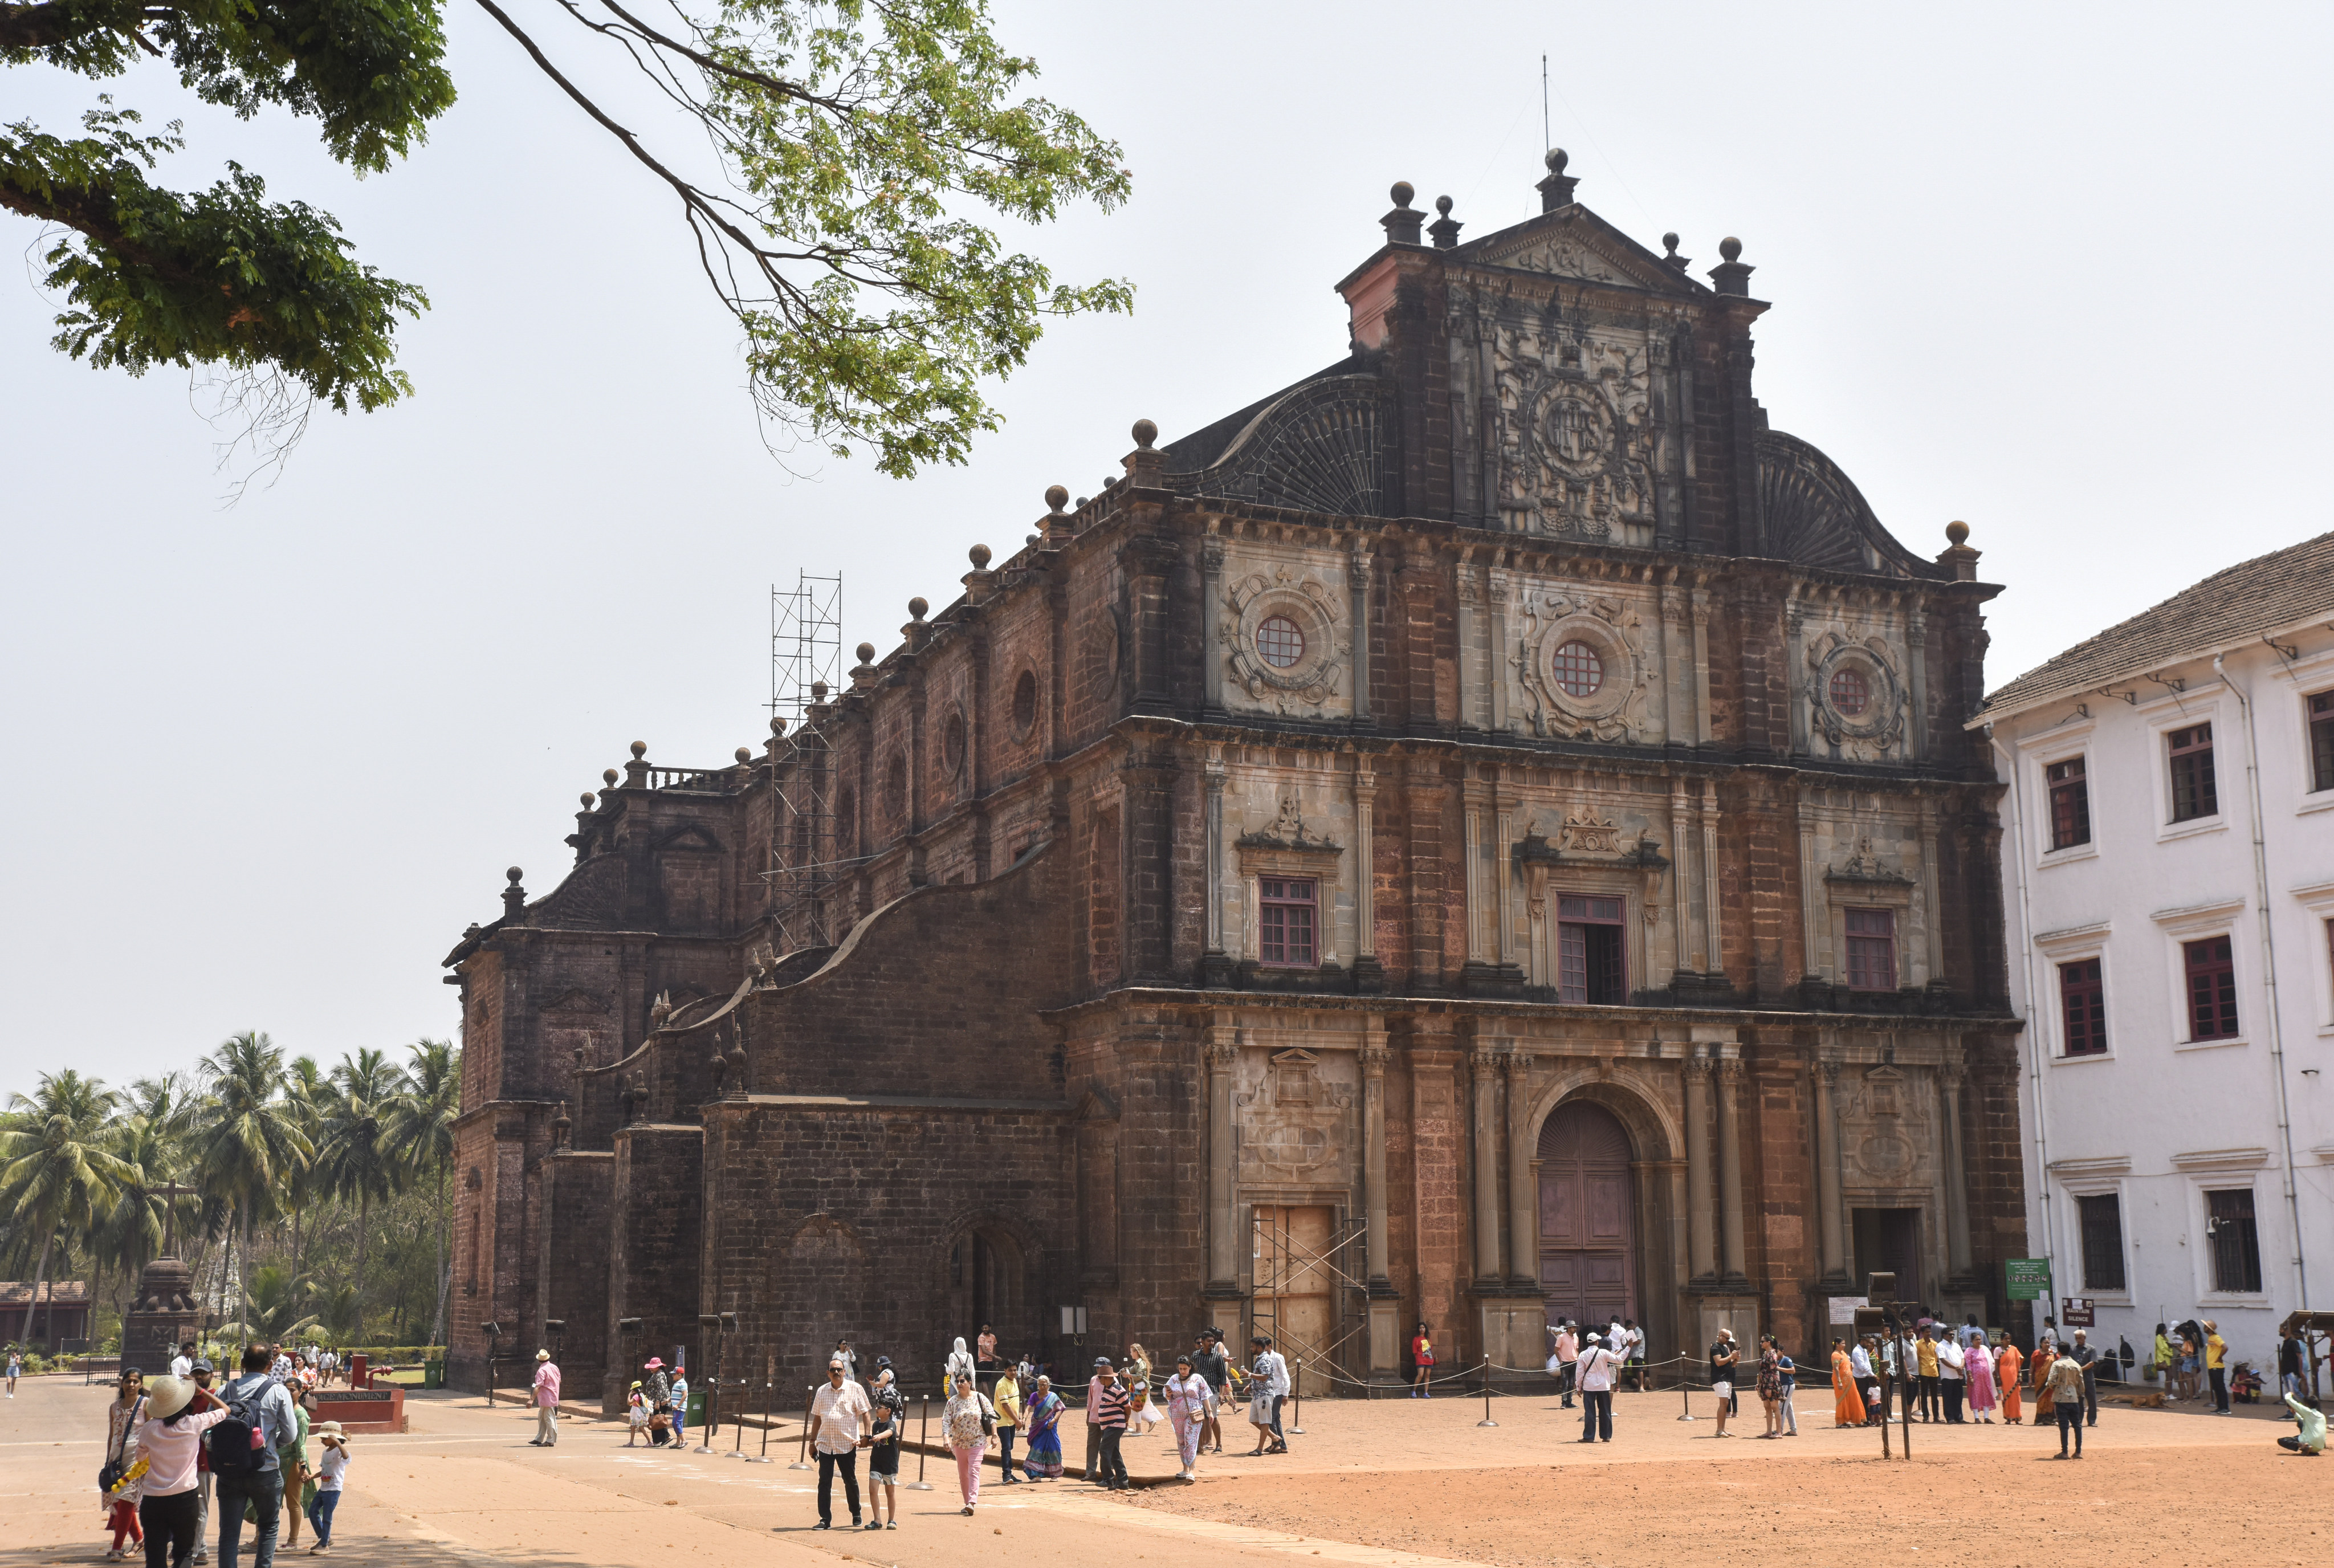 The Basilica of Bom Jesus in Goa, India, is one of the most magnificent Christian churches in Asia. Photo: Ronan O’Connell